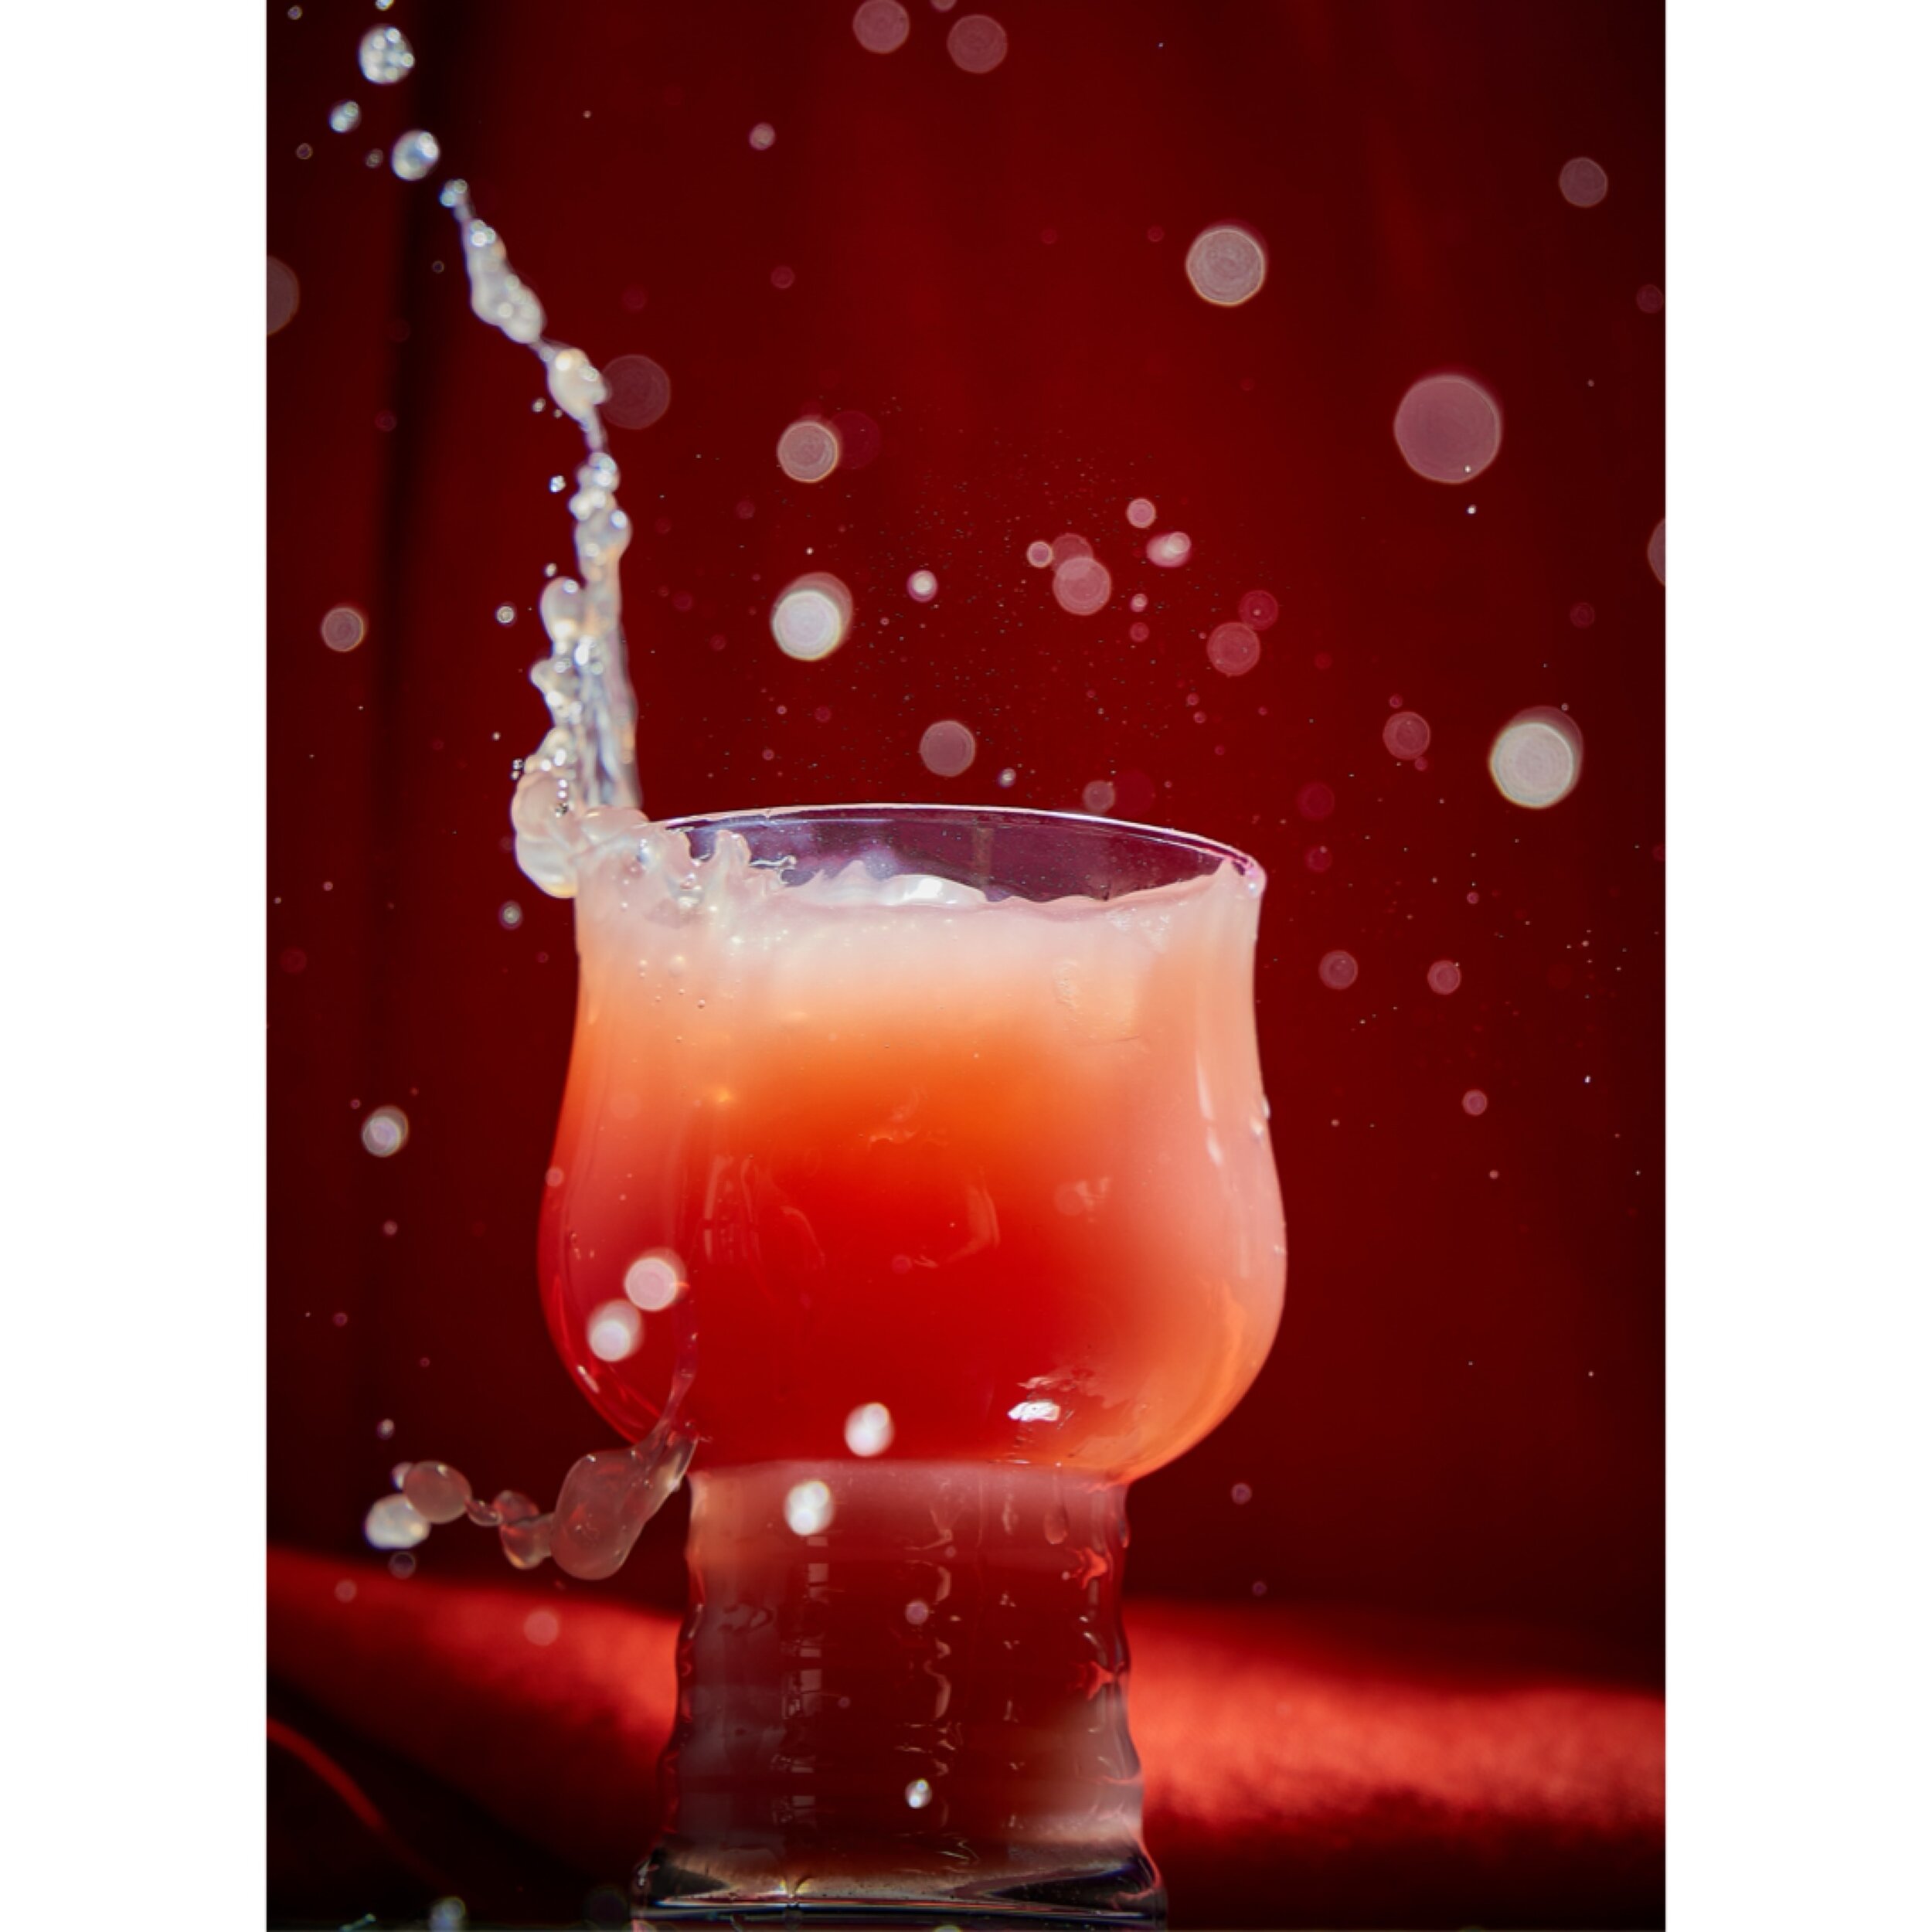 Splish splash, waiting for spring to spring so we can have some warm weather cocktail photo shoots. #pageandplate #beveragephotography #cocktails #beveragephotography #drinkstyling #chicagobeveragephotographer #beveragephotographer #margarita #splash